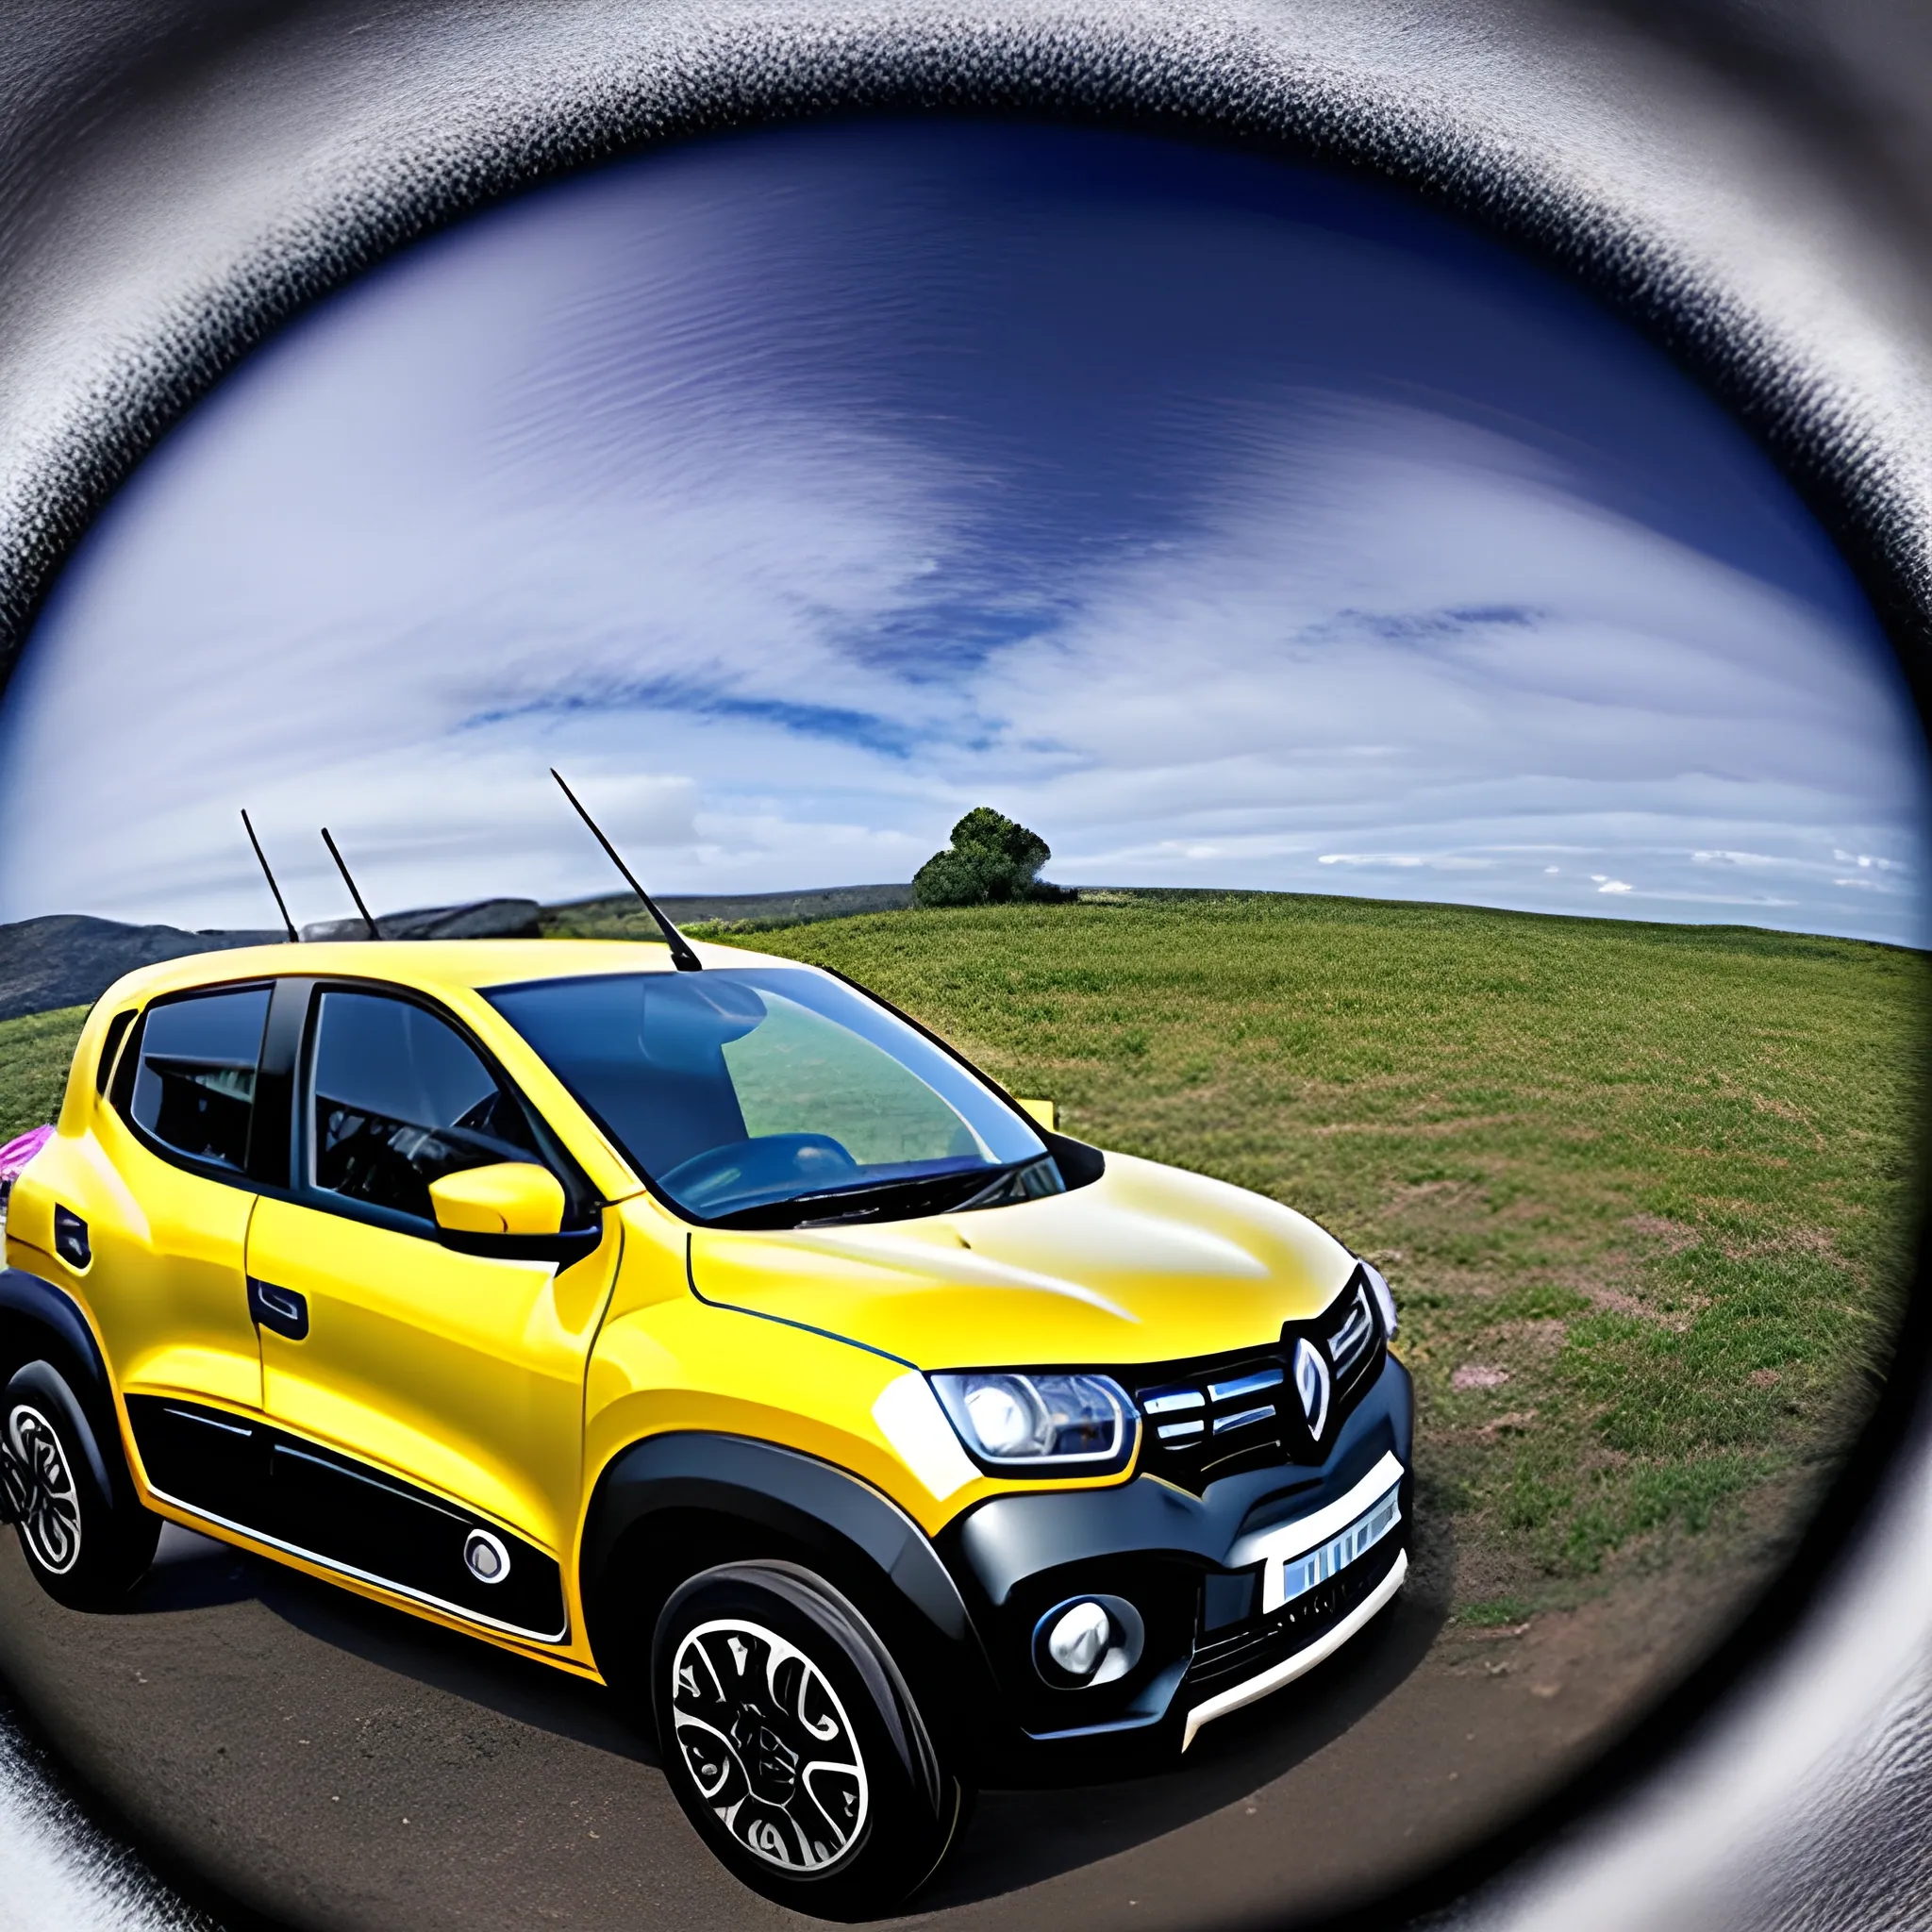 ultra detailed, Renault KWID Model driving, perfect composition, BREAK, Design an image with a fish eye lens effect, capturing a wide field of view with a distinctive, curved perspective, Trippy